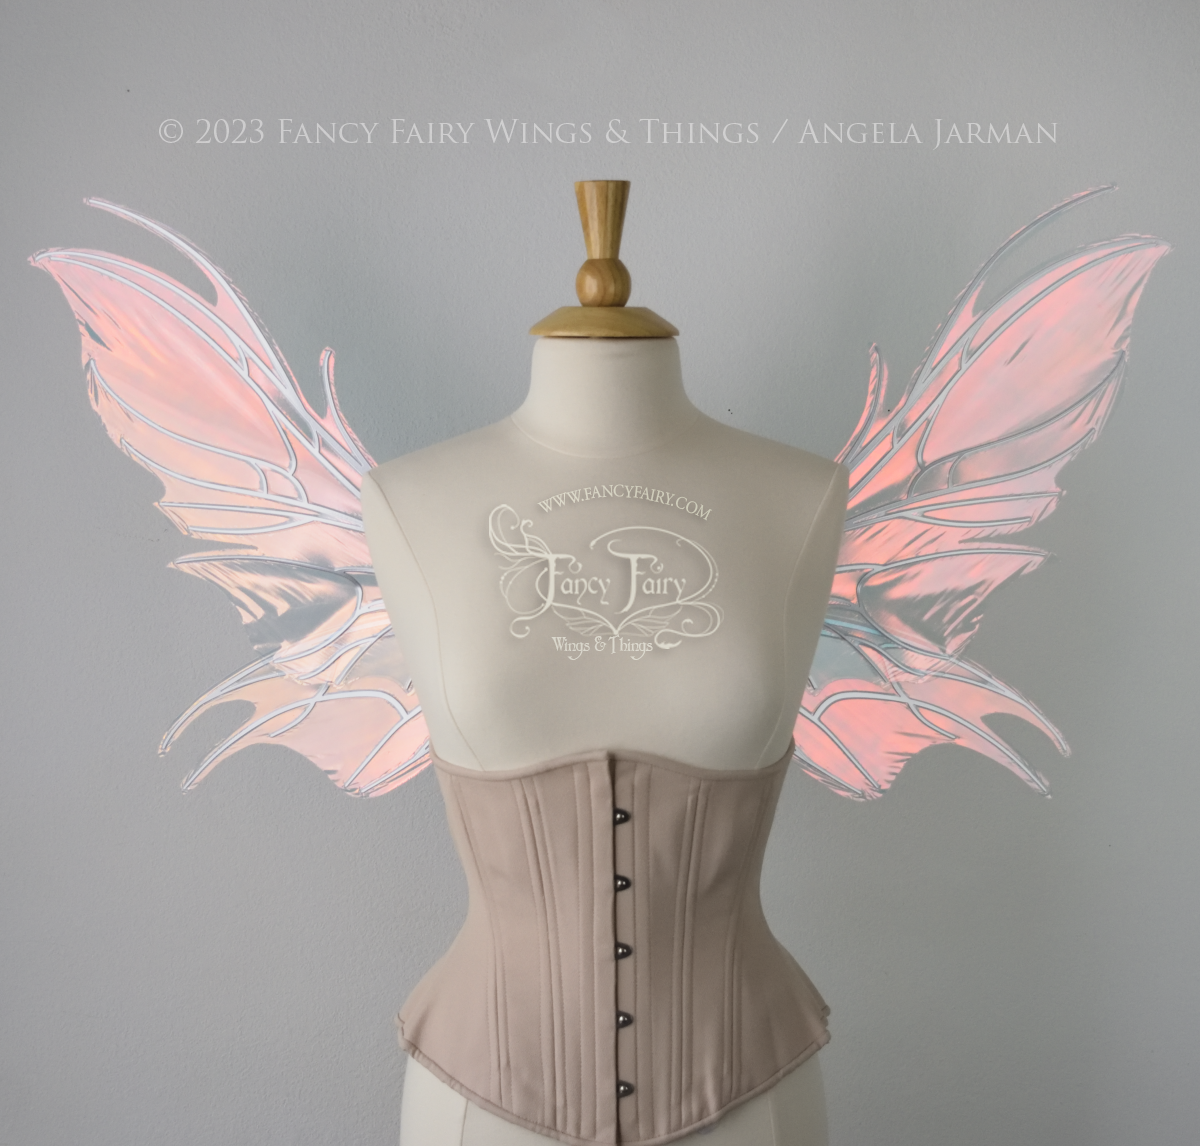 Front view of iridescent pink / orange fairy wings with spikey silver veins, worn by a dress form